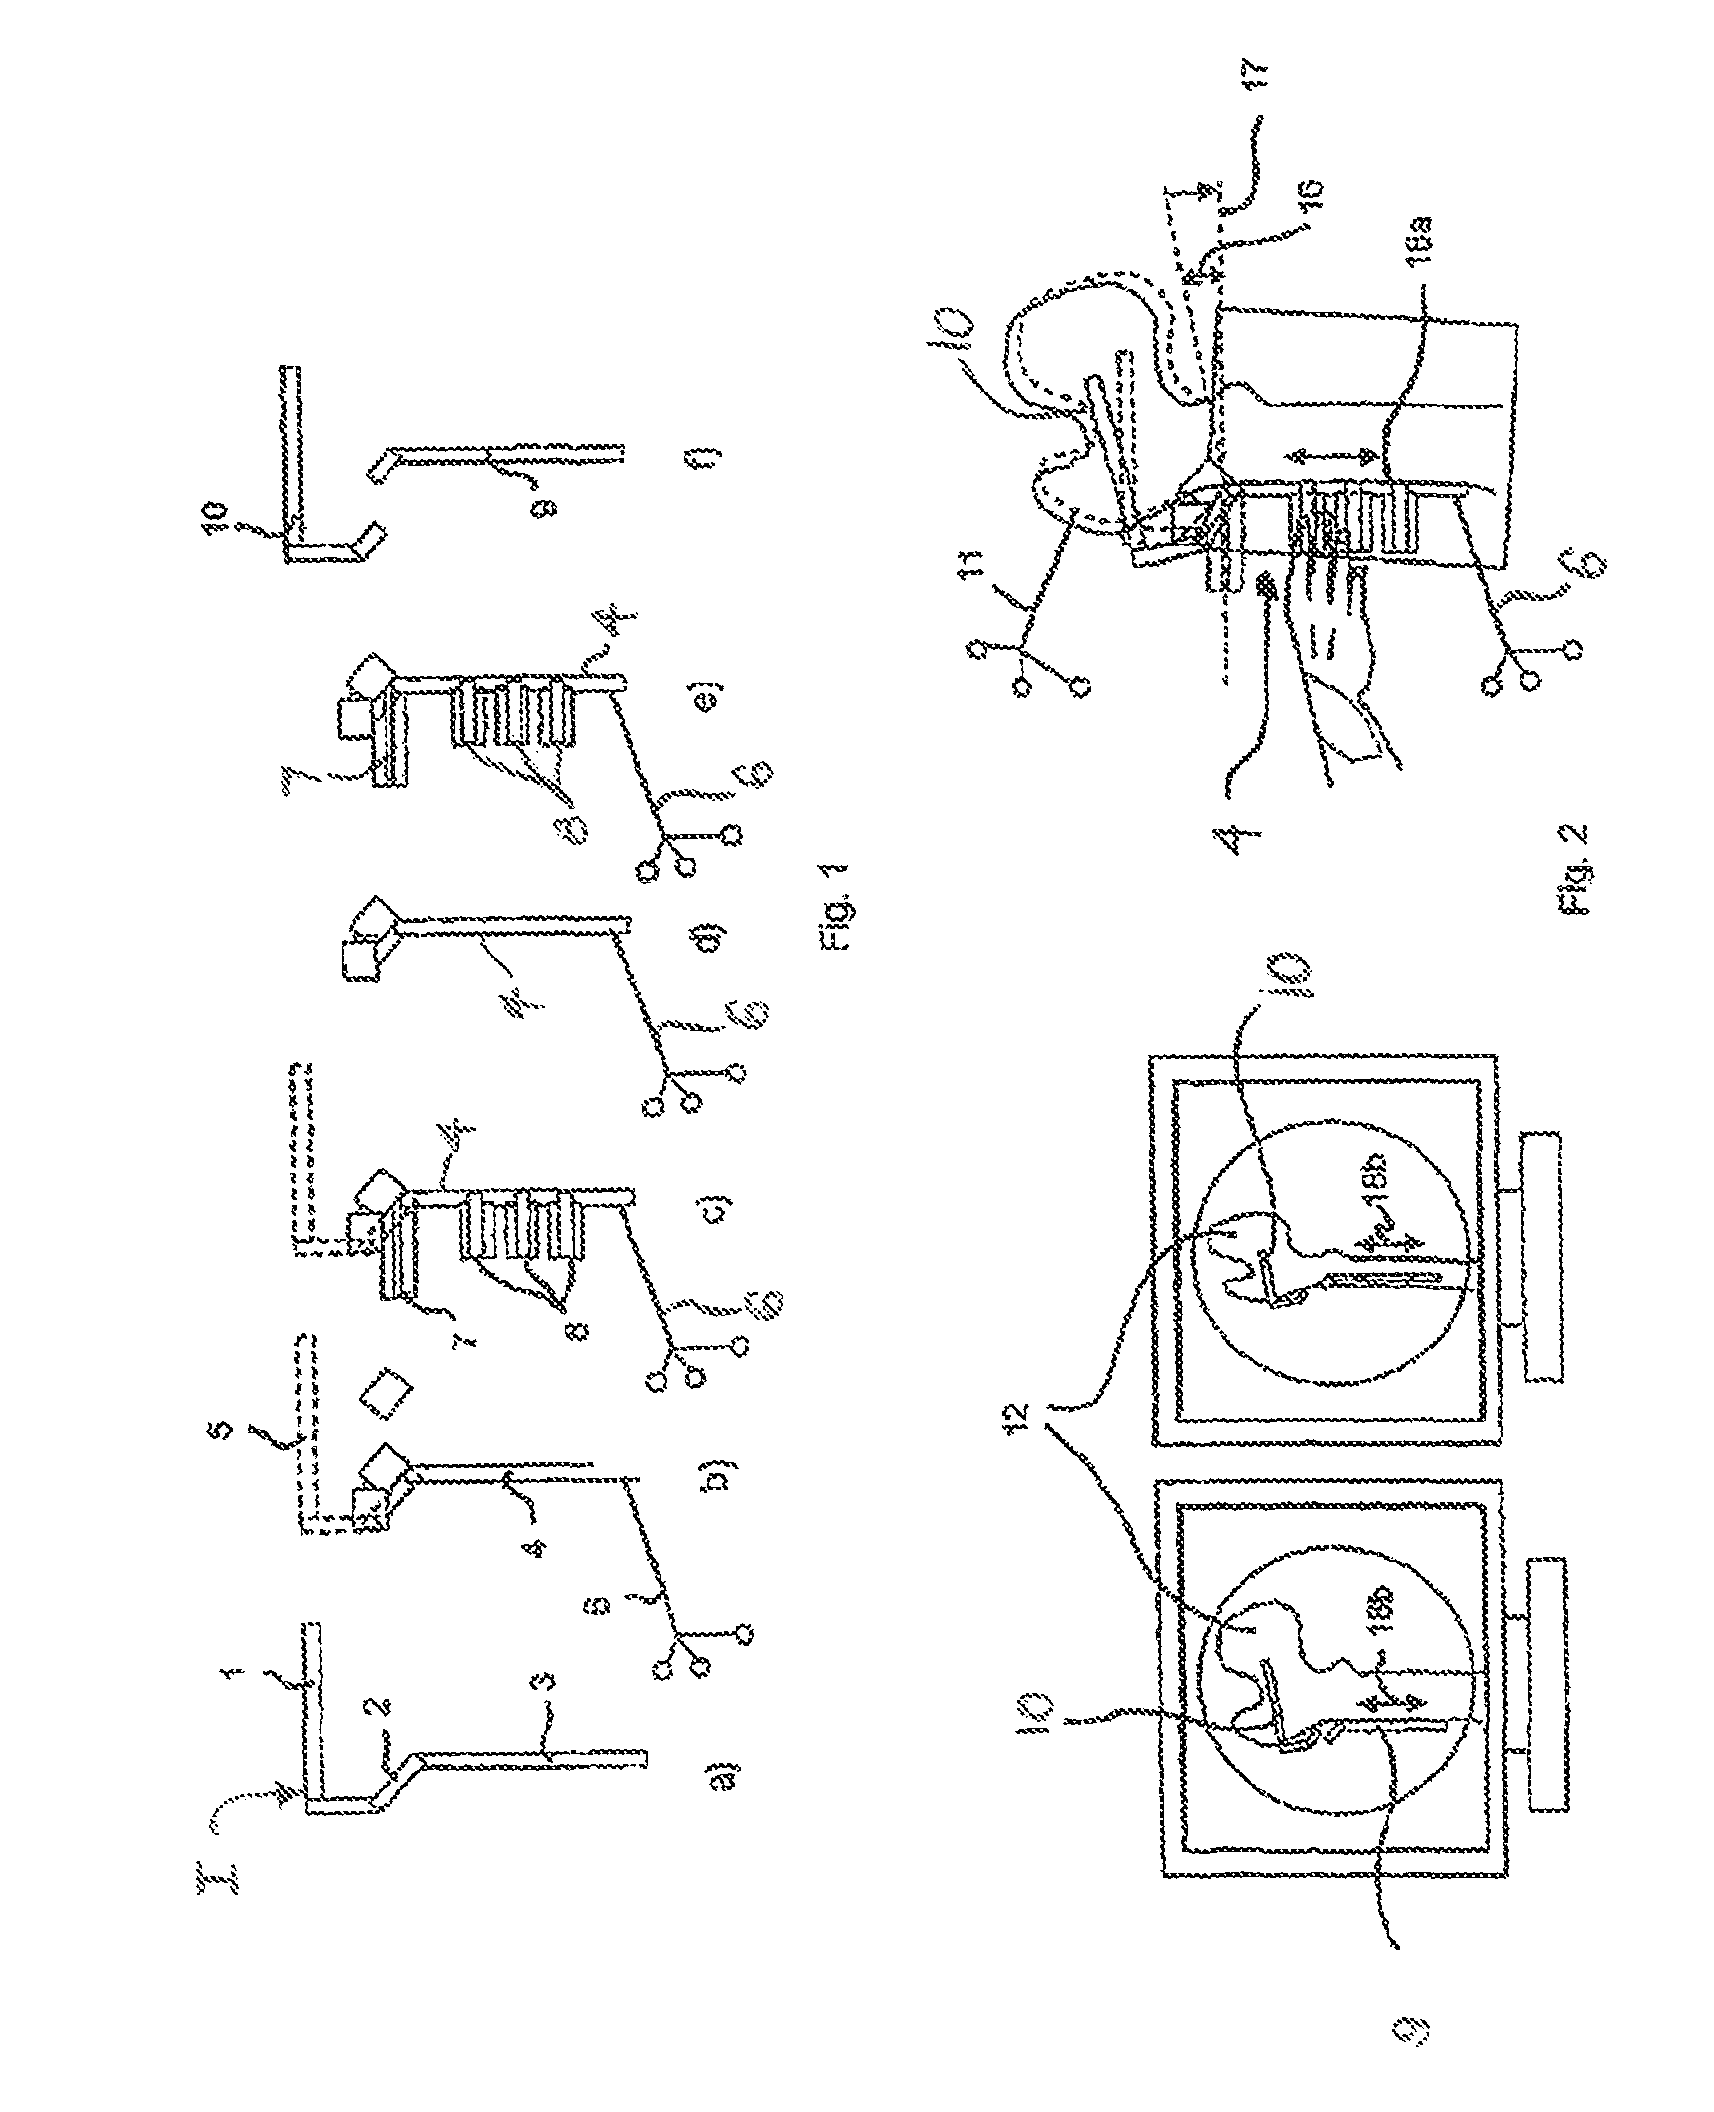 Implant location positioning system